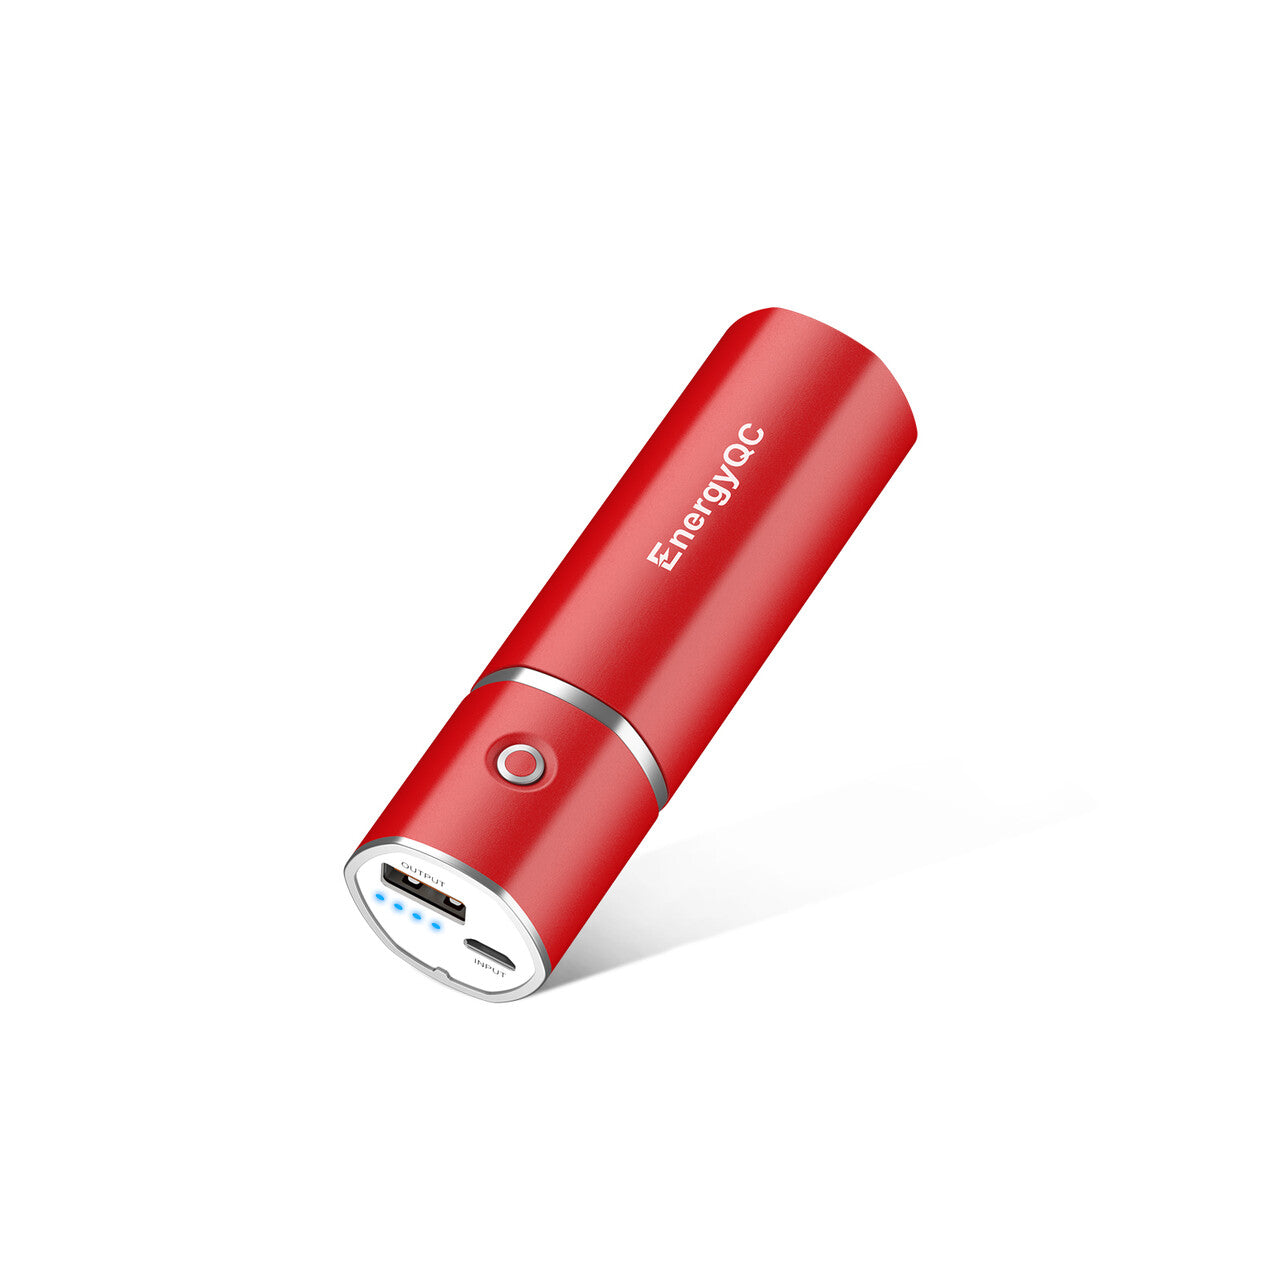 a red Slim 2 Portable Charger